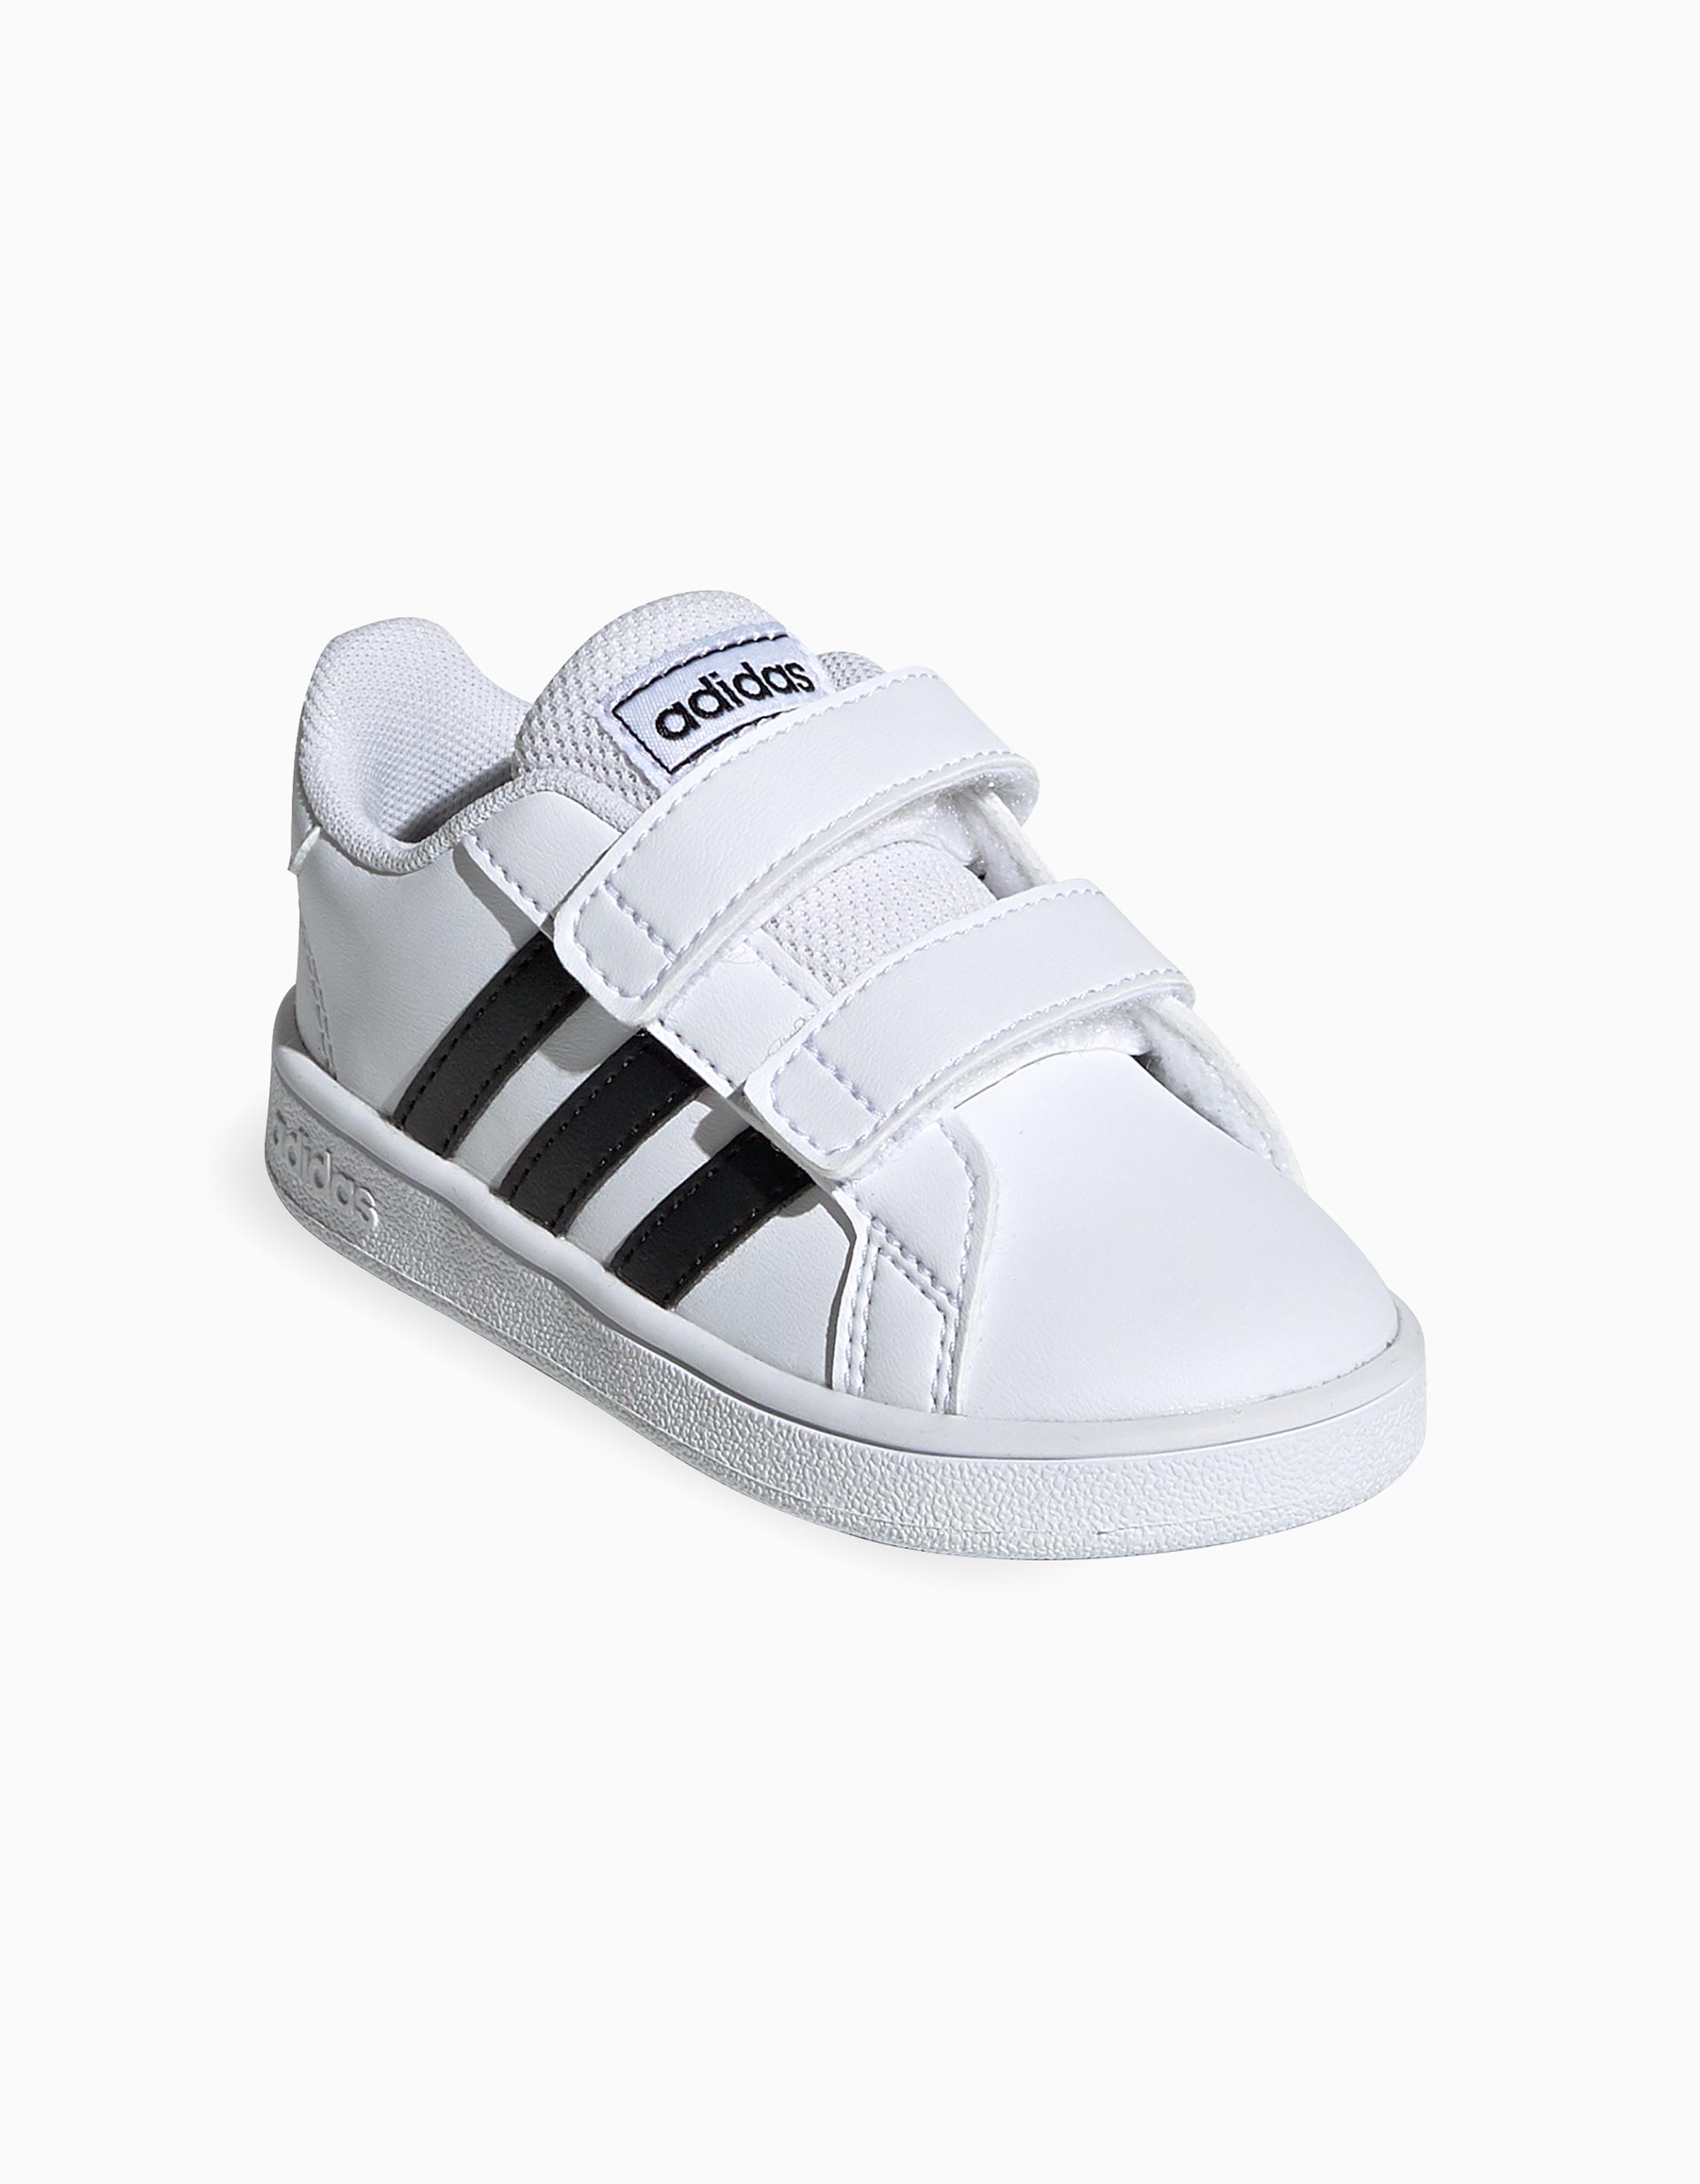 Trainers for Babies, 'Adidas Grand Court', White/Black | Zippy Online